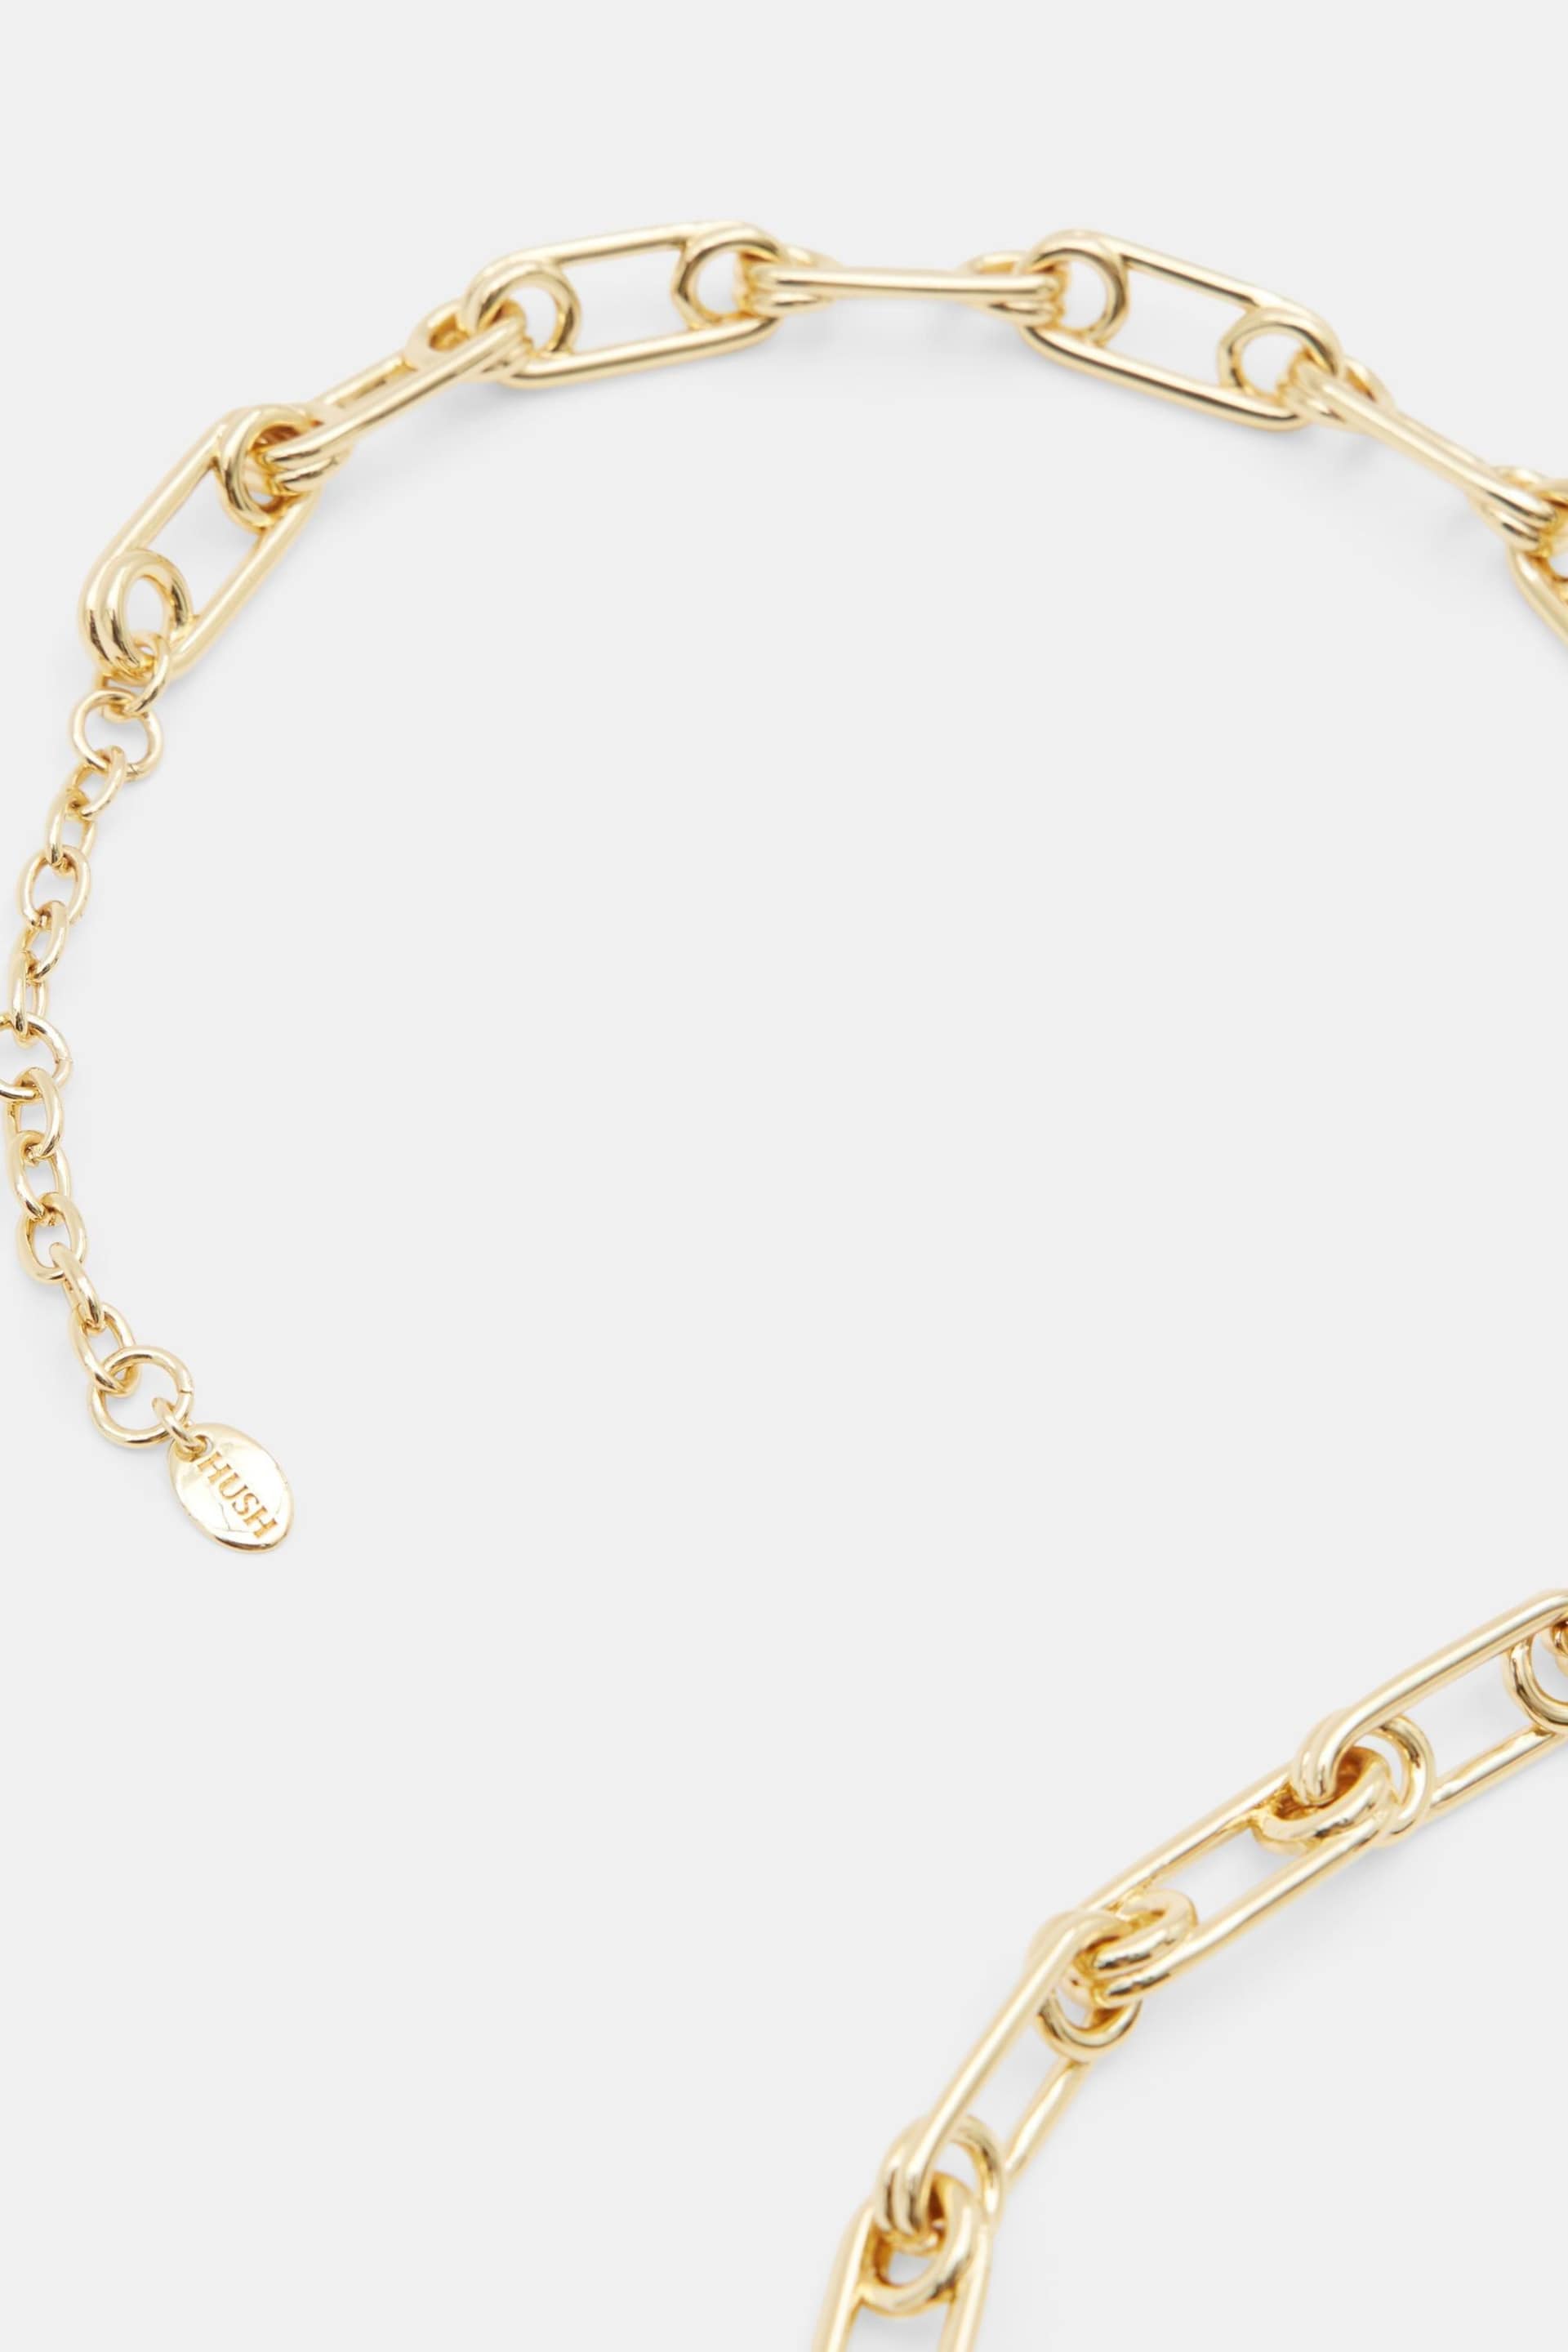 Hush Gold Tone Josey Chain Necklace - Image 2 of 4